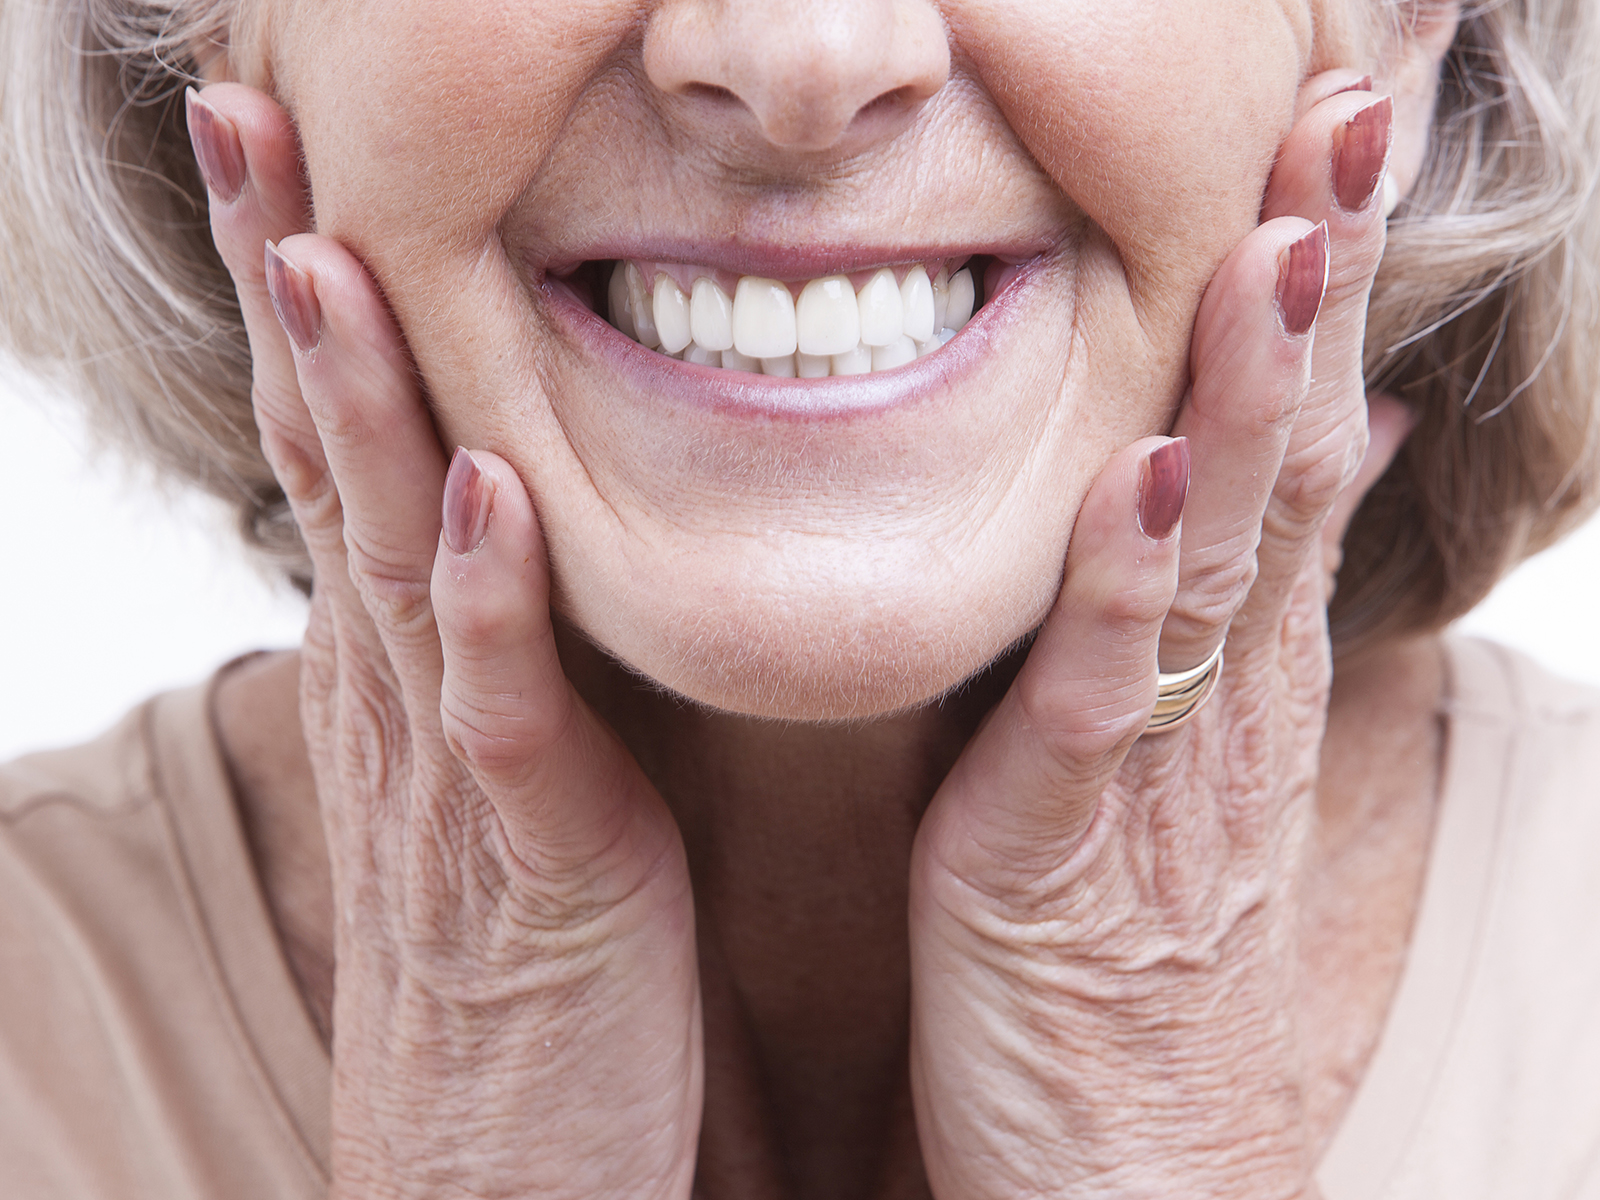 What Is The Difference Between Economy And Premium Dentures?